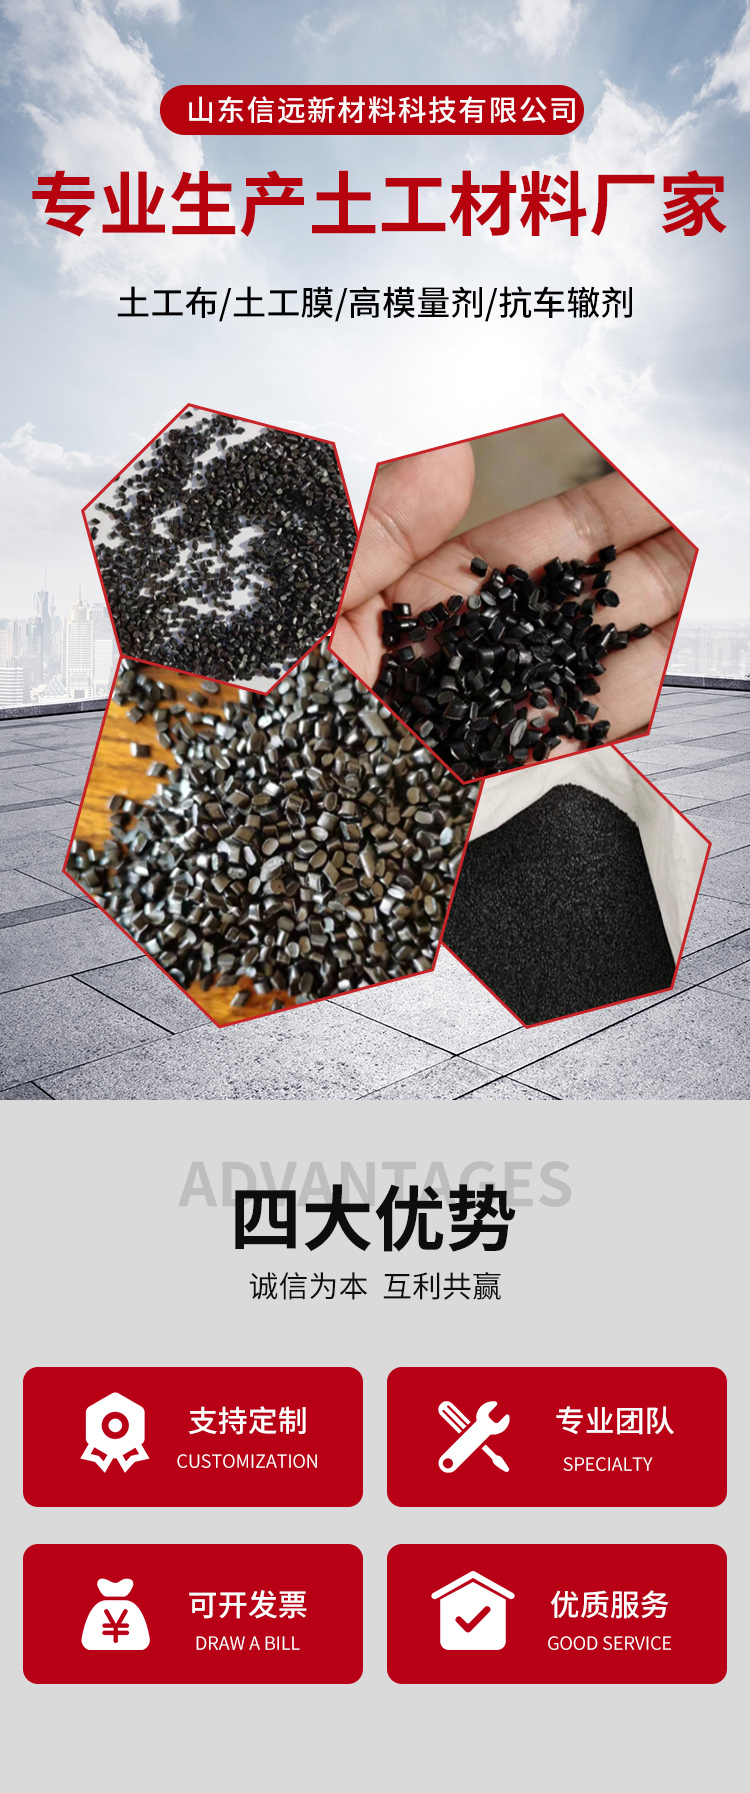 Full production and sales specifications of anti rutting agent, pan Asian asphalt modifier, additive, high modulus agent